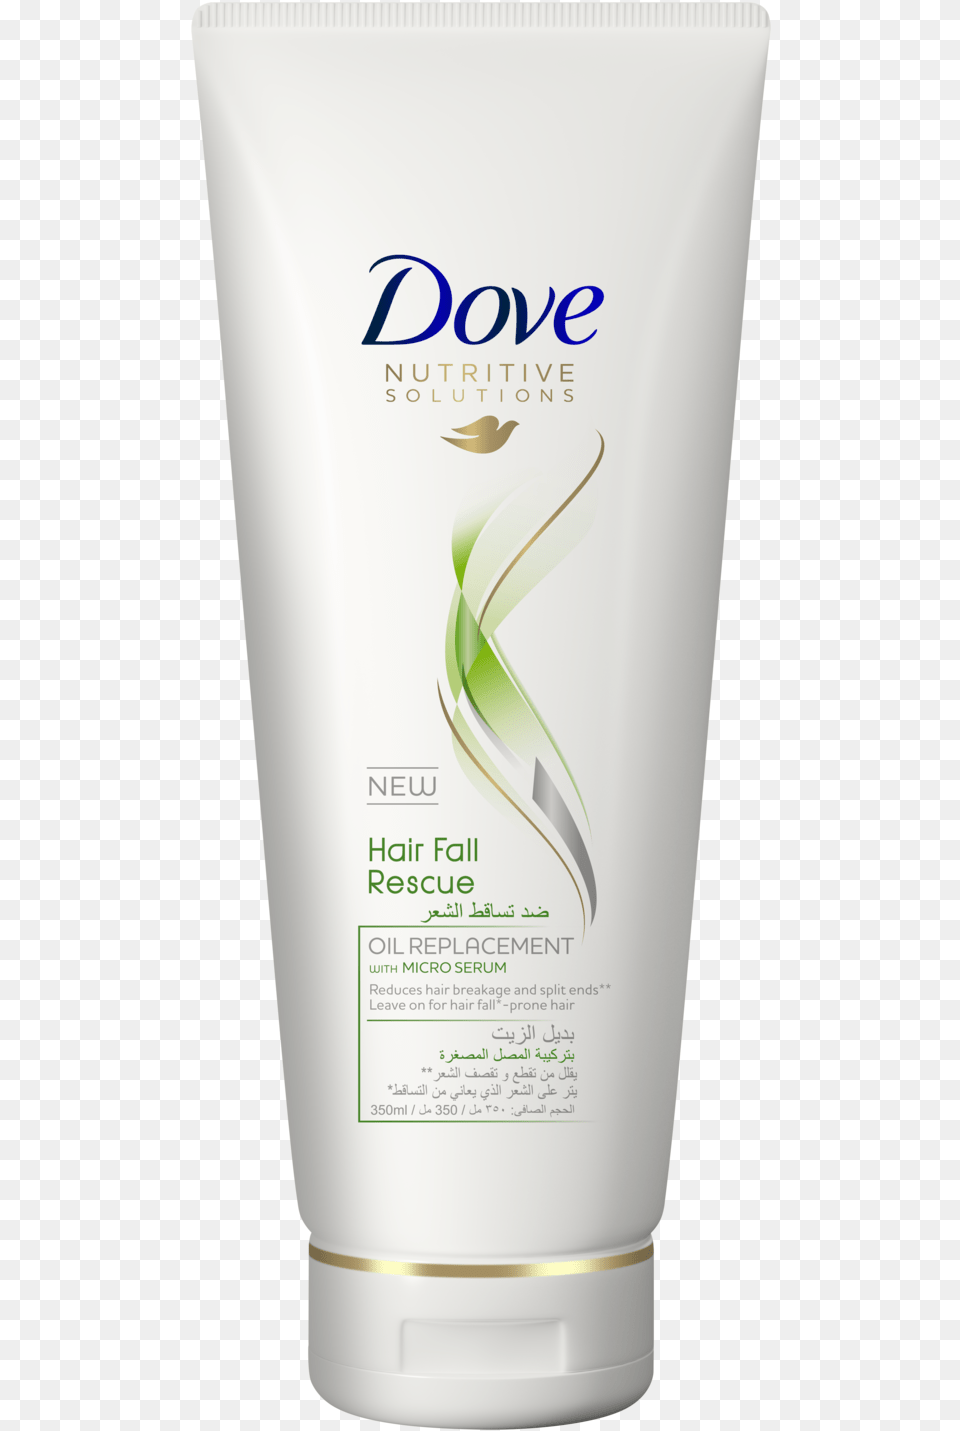 Dove Hair Fall Rescue Oil Replacement 350ml Propolis Cream Forever Living, Bottle, Lotion, Cosmetics Png Image